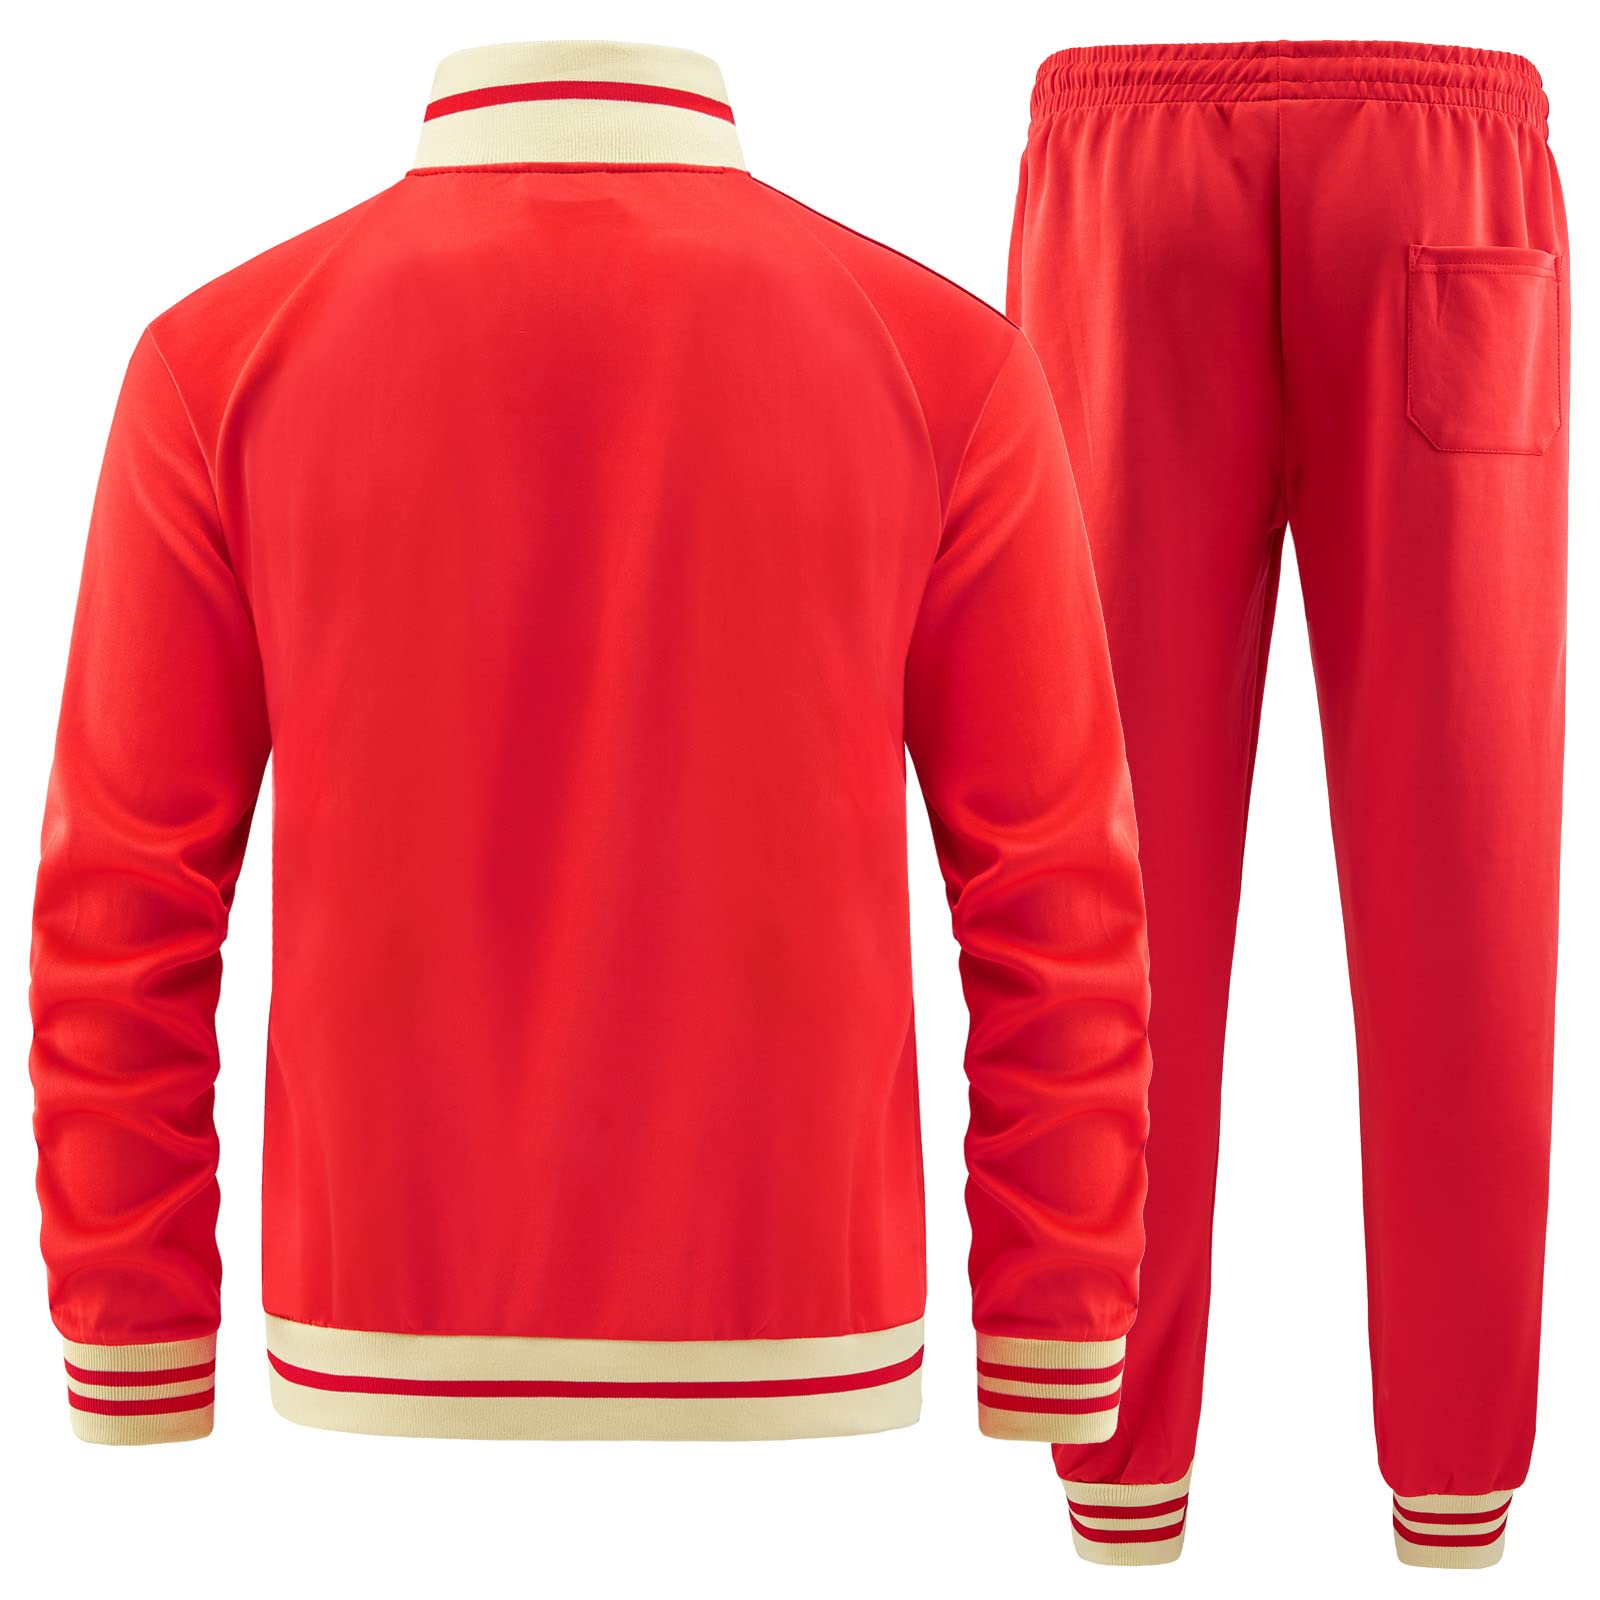 dioxoib Track Suits for Men Set 2 Piece Tracksuits Mens Sweatsuits Sets Jogging Two Piece Outfits Athletic Clothes Jogger Sweat Suits Running Sport leisure Clothing Red Ai-TZ003-S